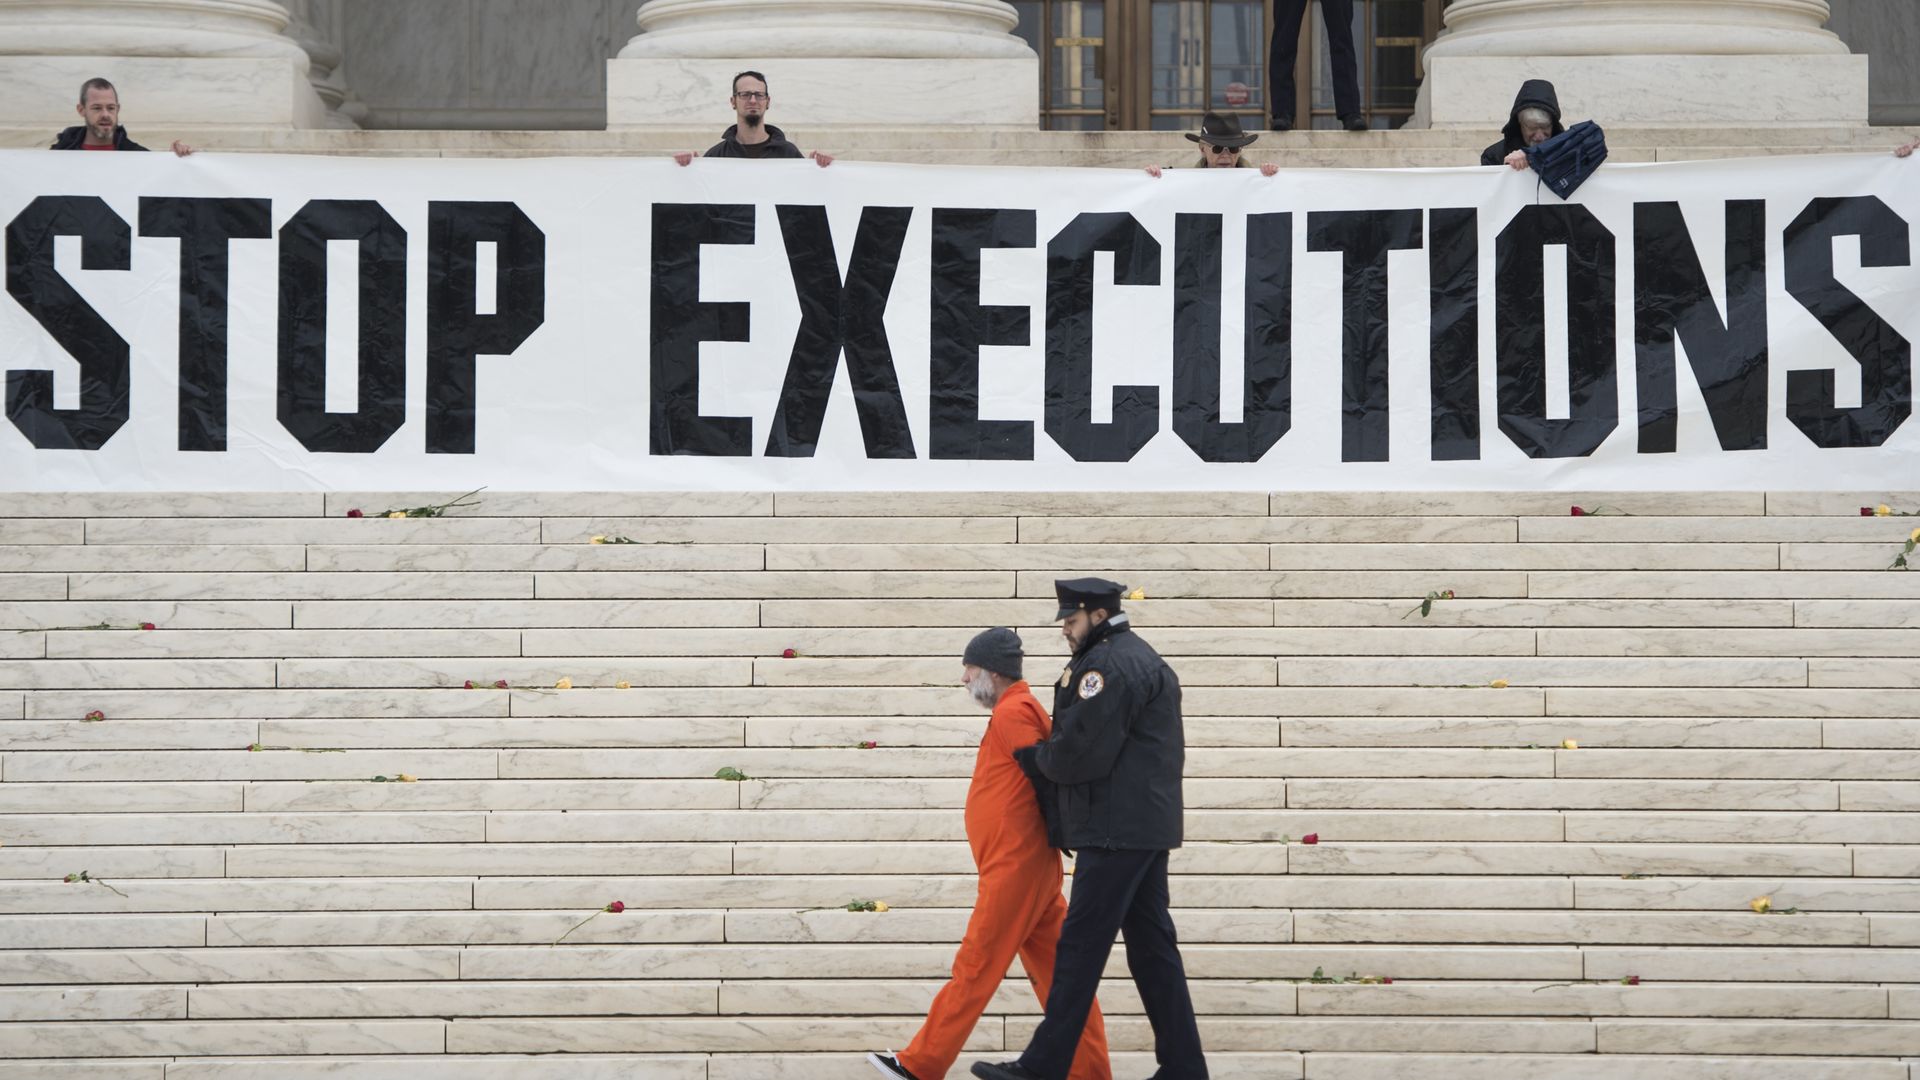 man in orange jumpsuit being escorted by police officer sign that says "stop executions" is being held in the background